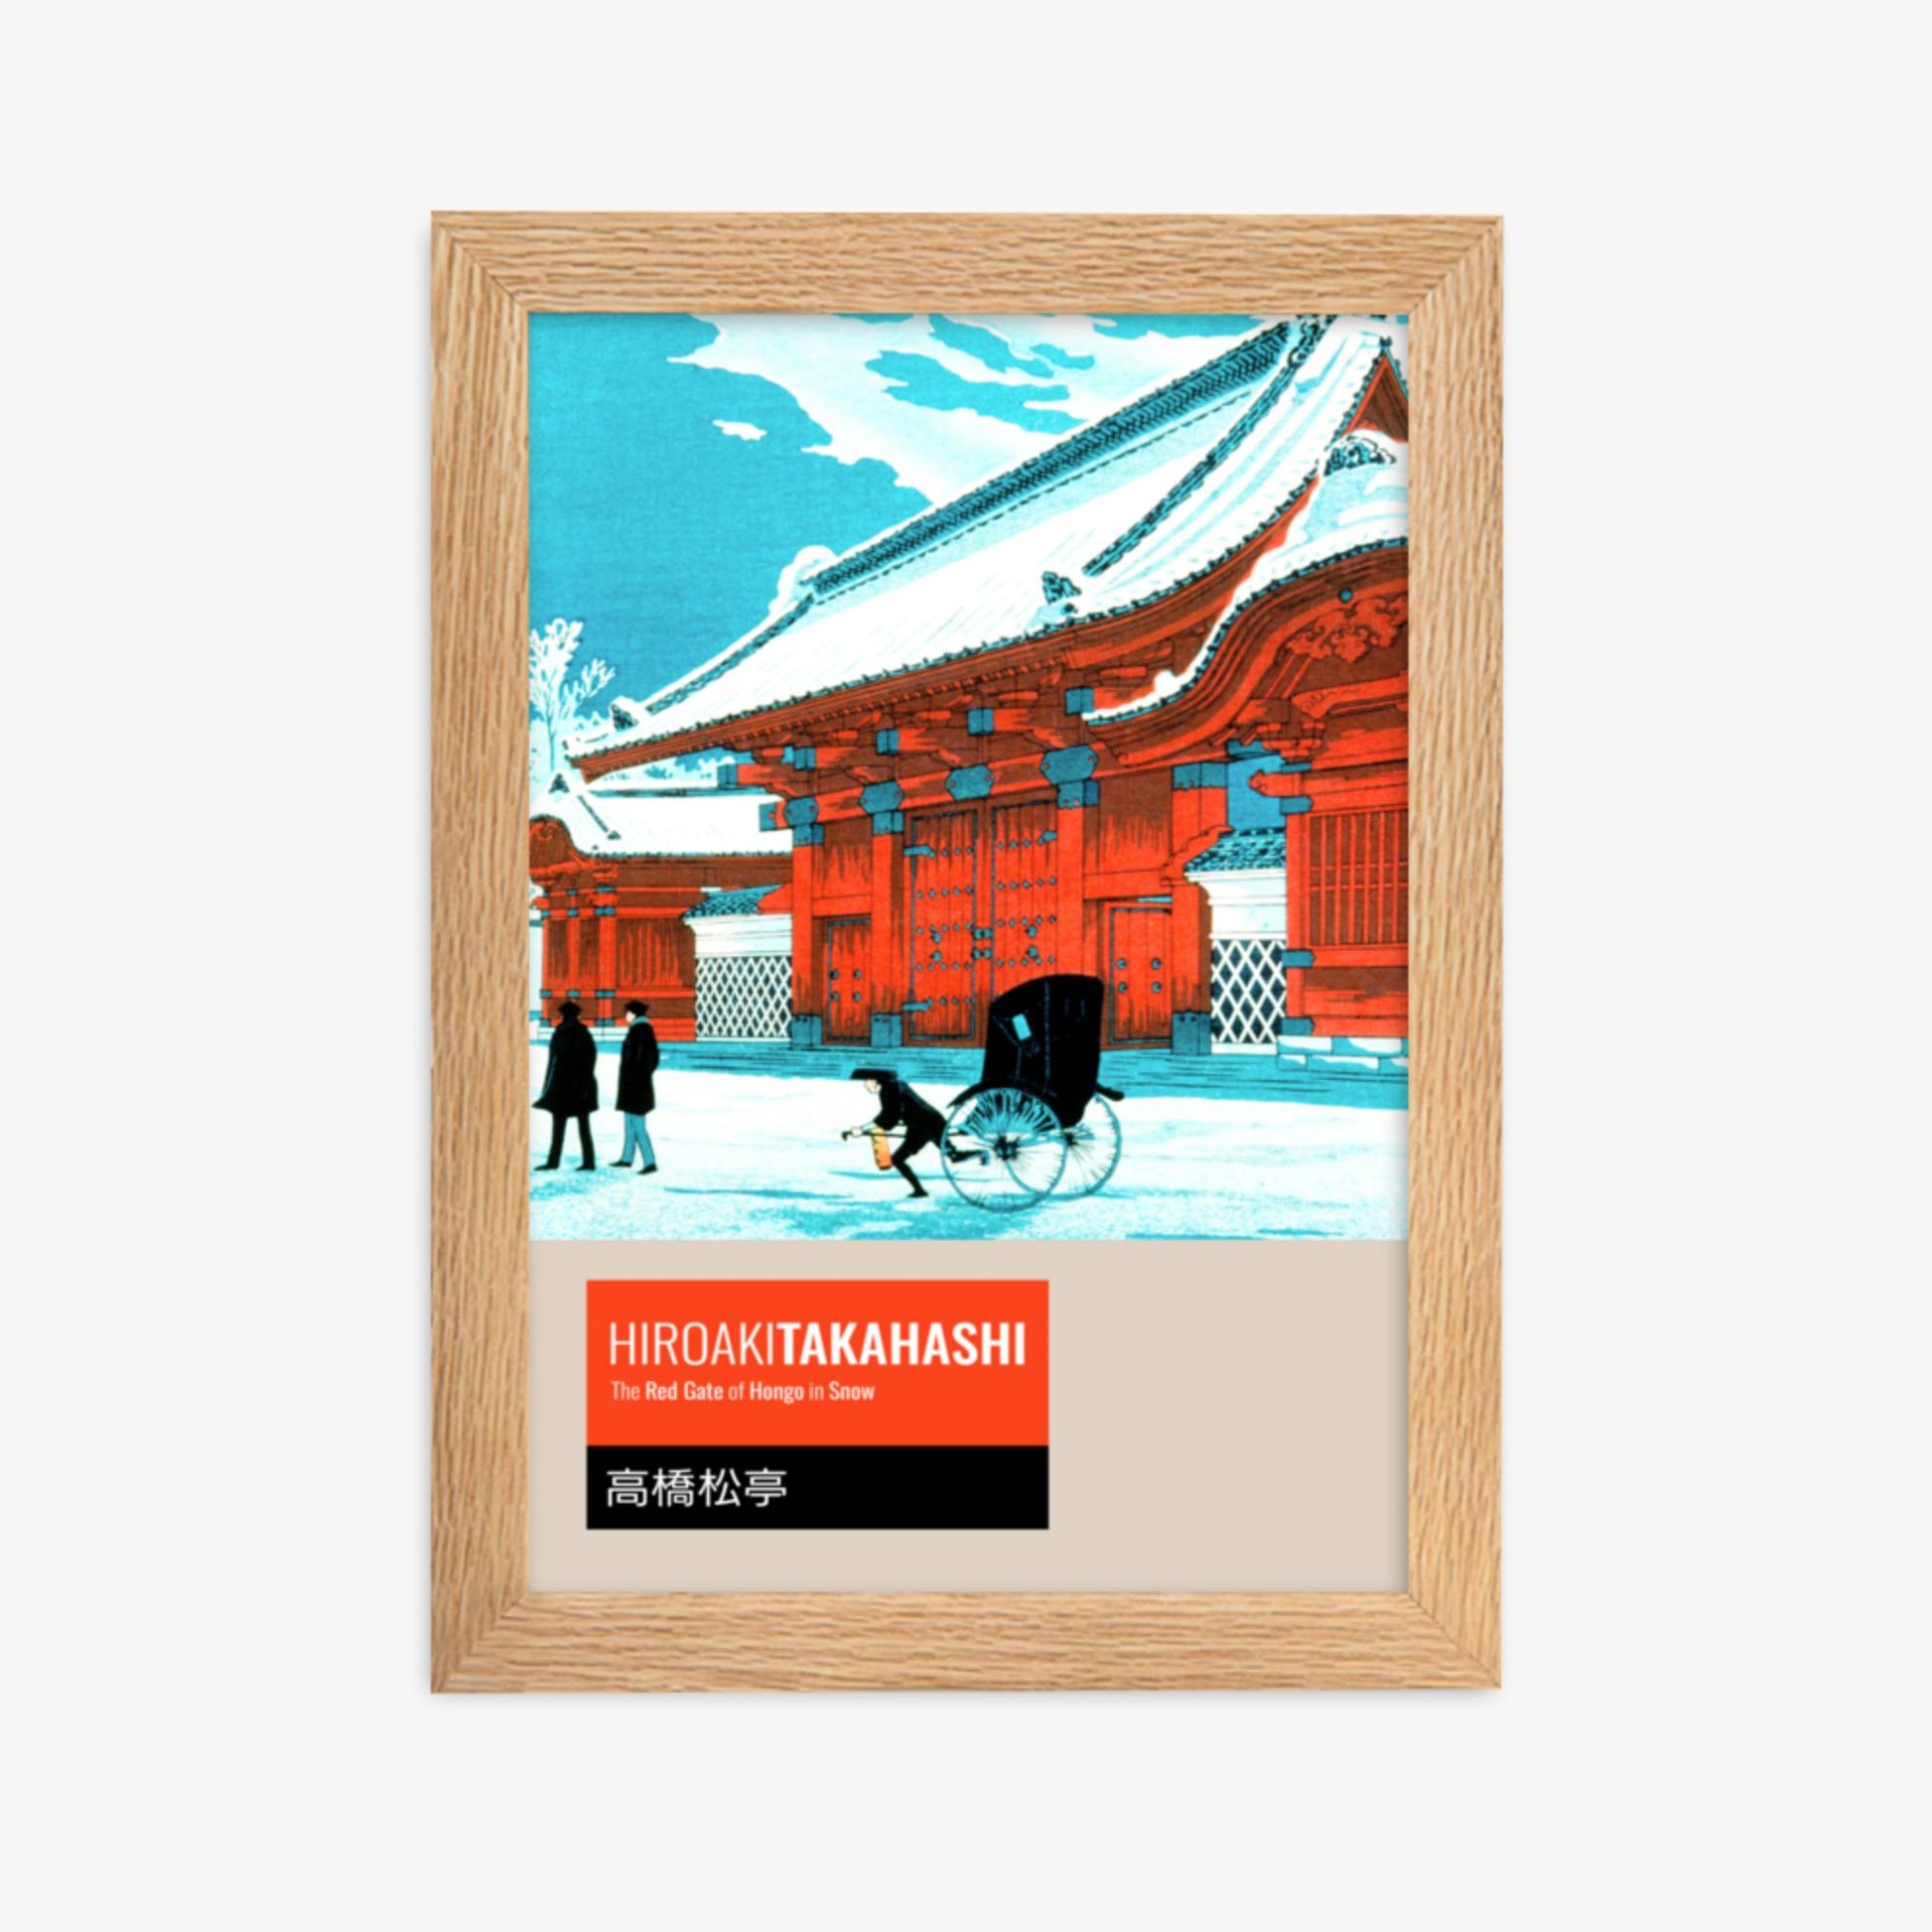 Takahashi Hiroaki (Shōtei) - The Red Gate of Hongo in Snow - Decoration 21x30 cm Poster With Oak Frame